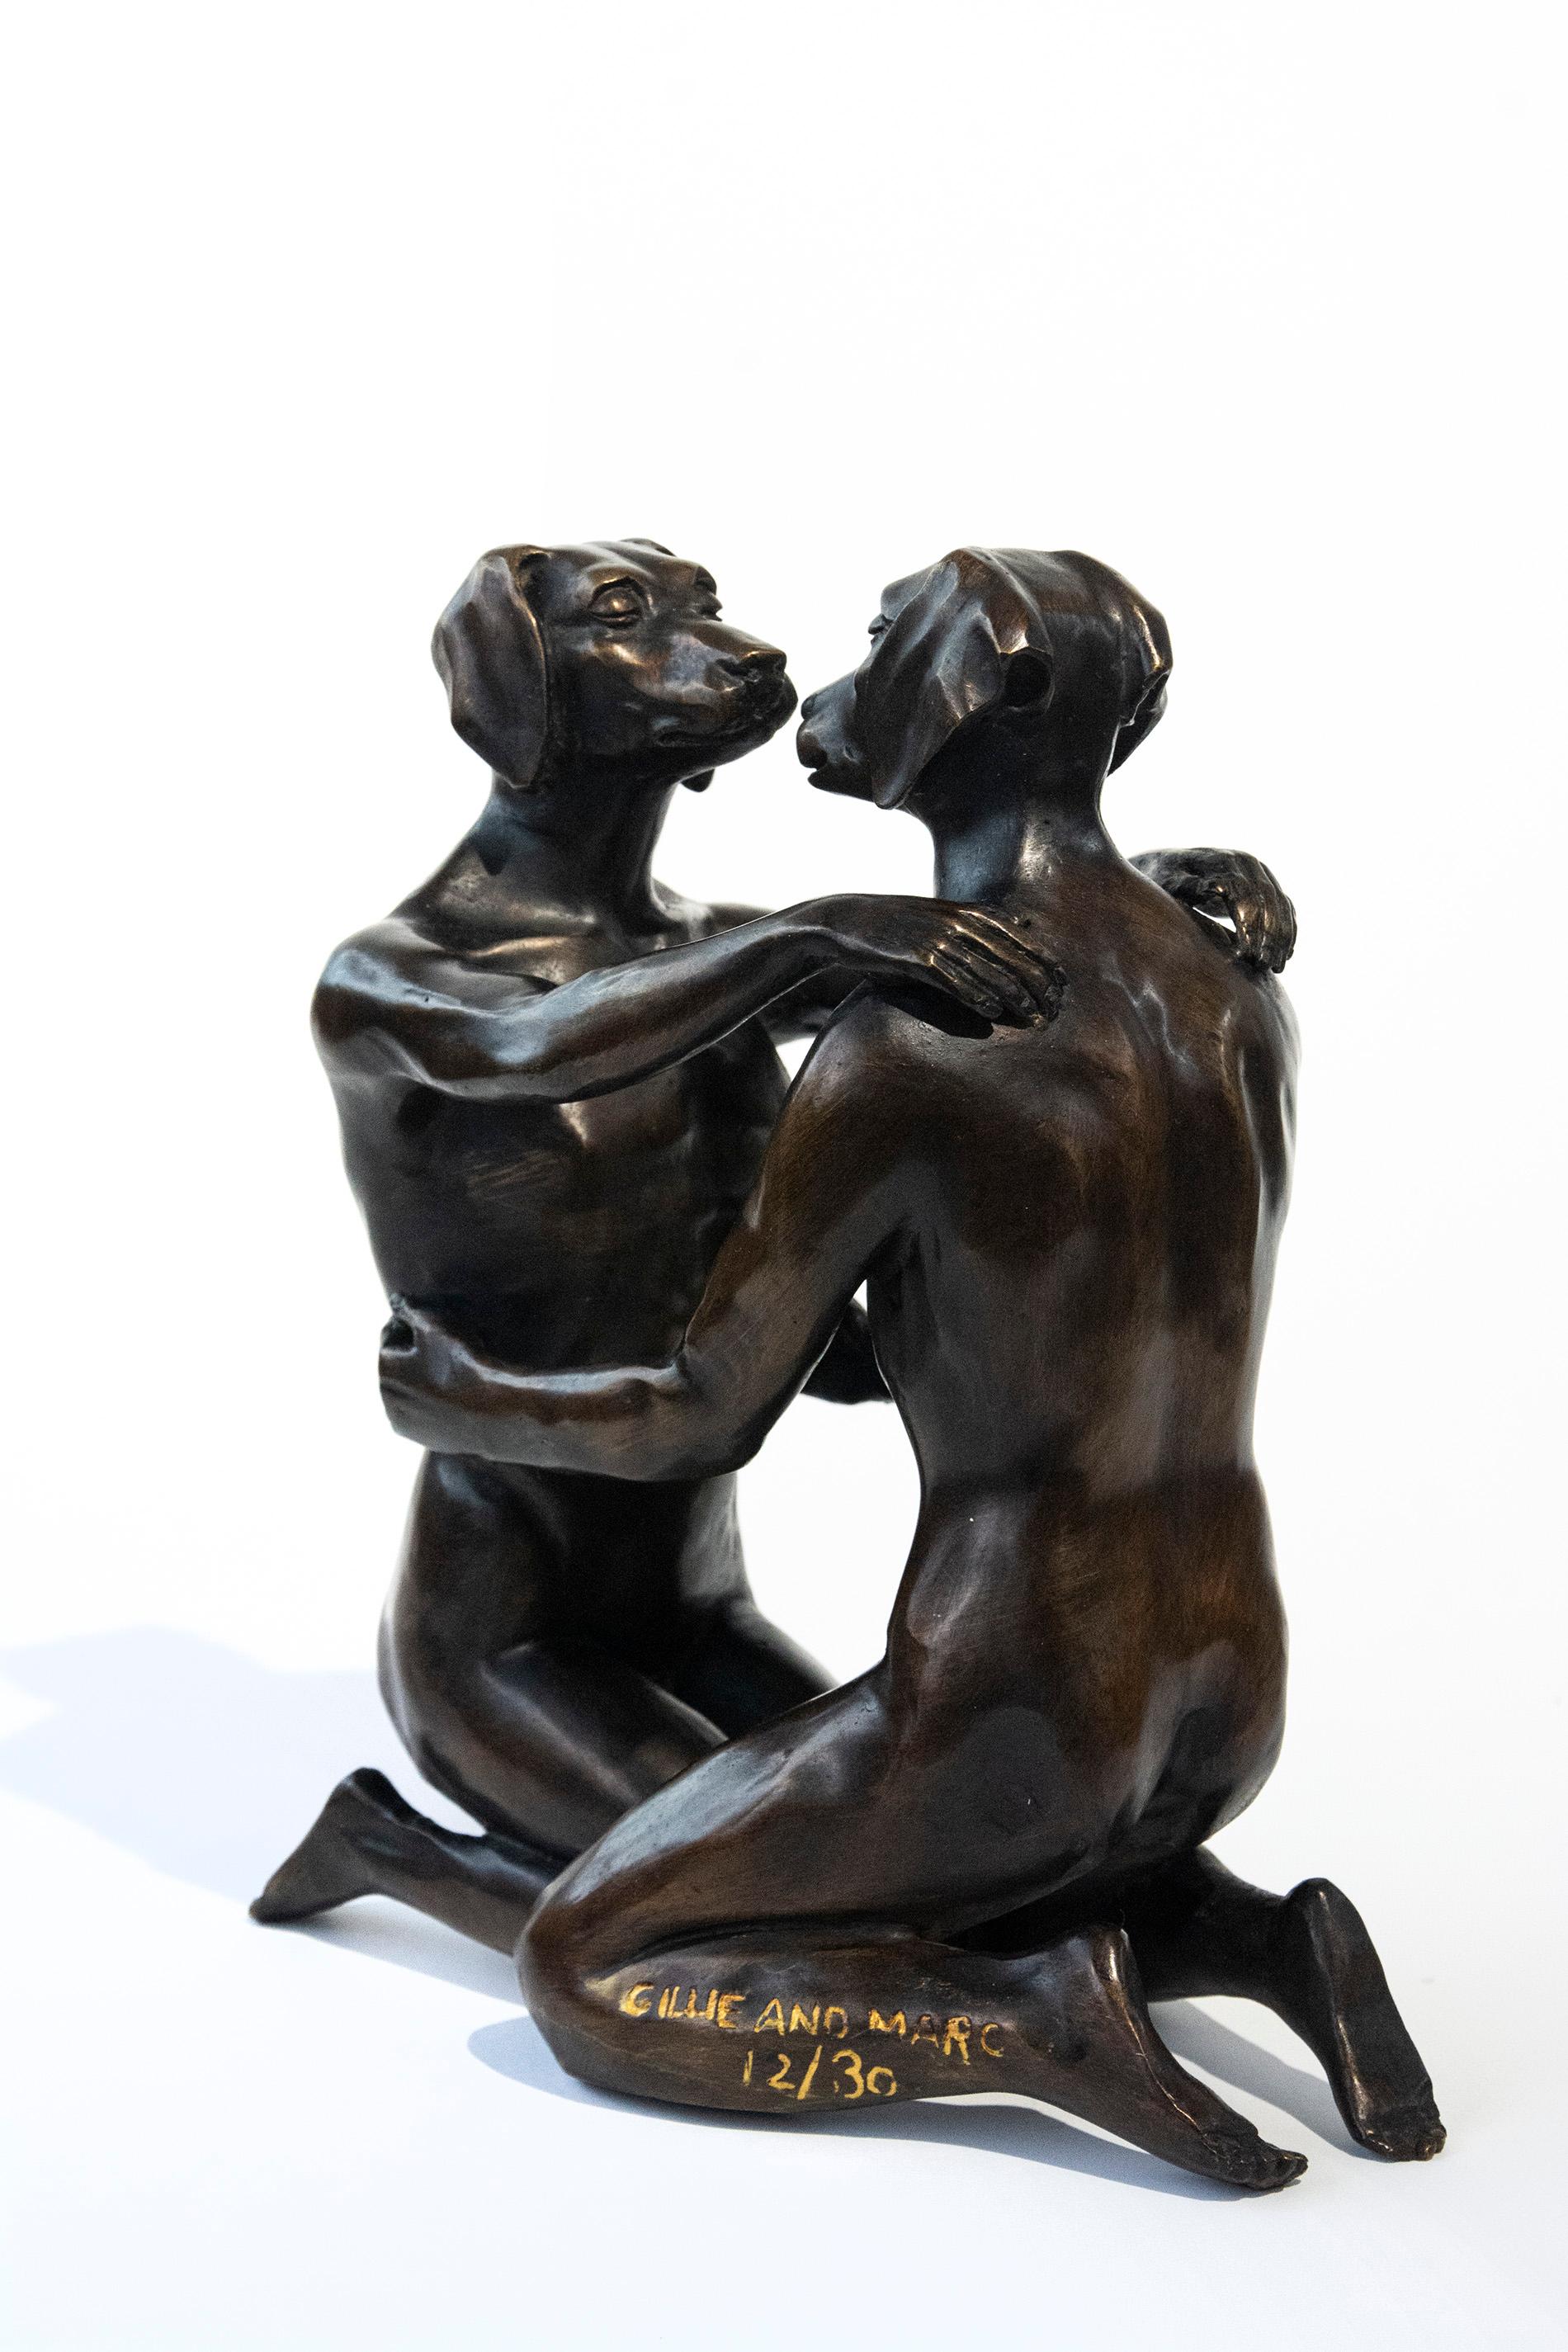 He loved being in love 12/30 - playful, figurative bronze sculpture - Sculpture by Gillie and Marc Schattner